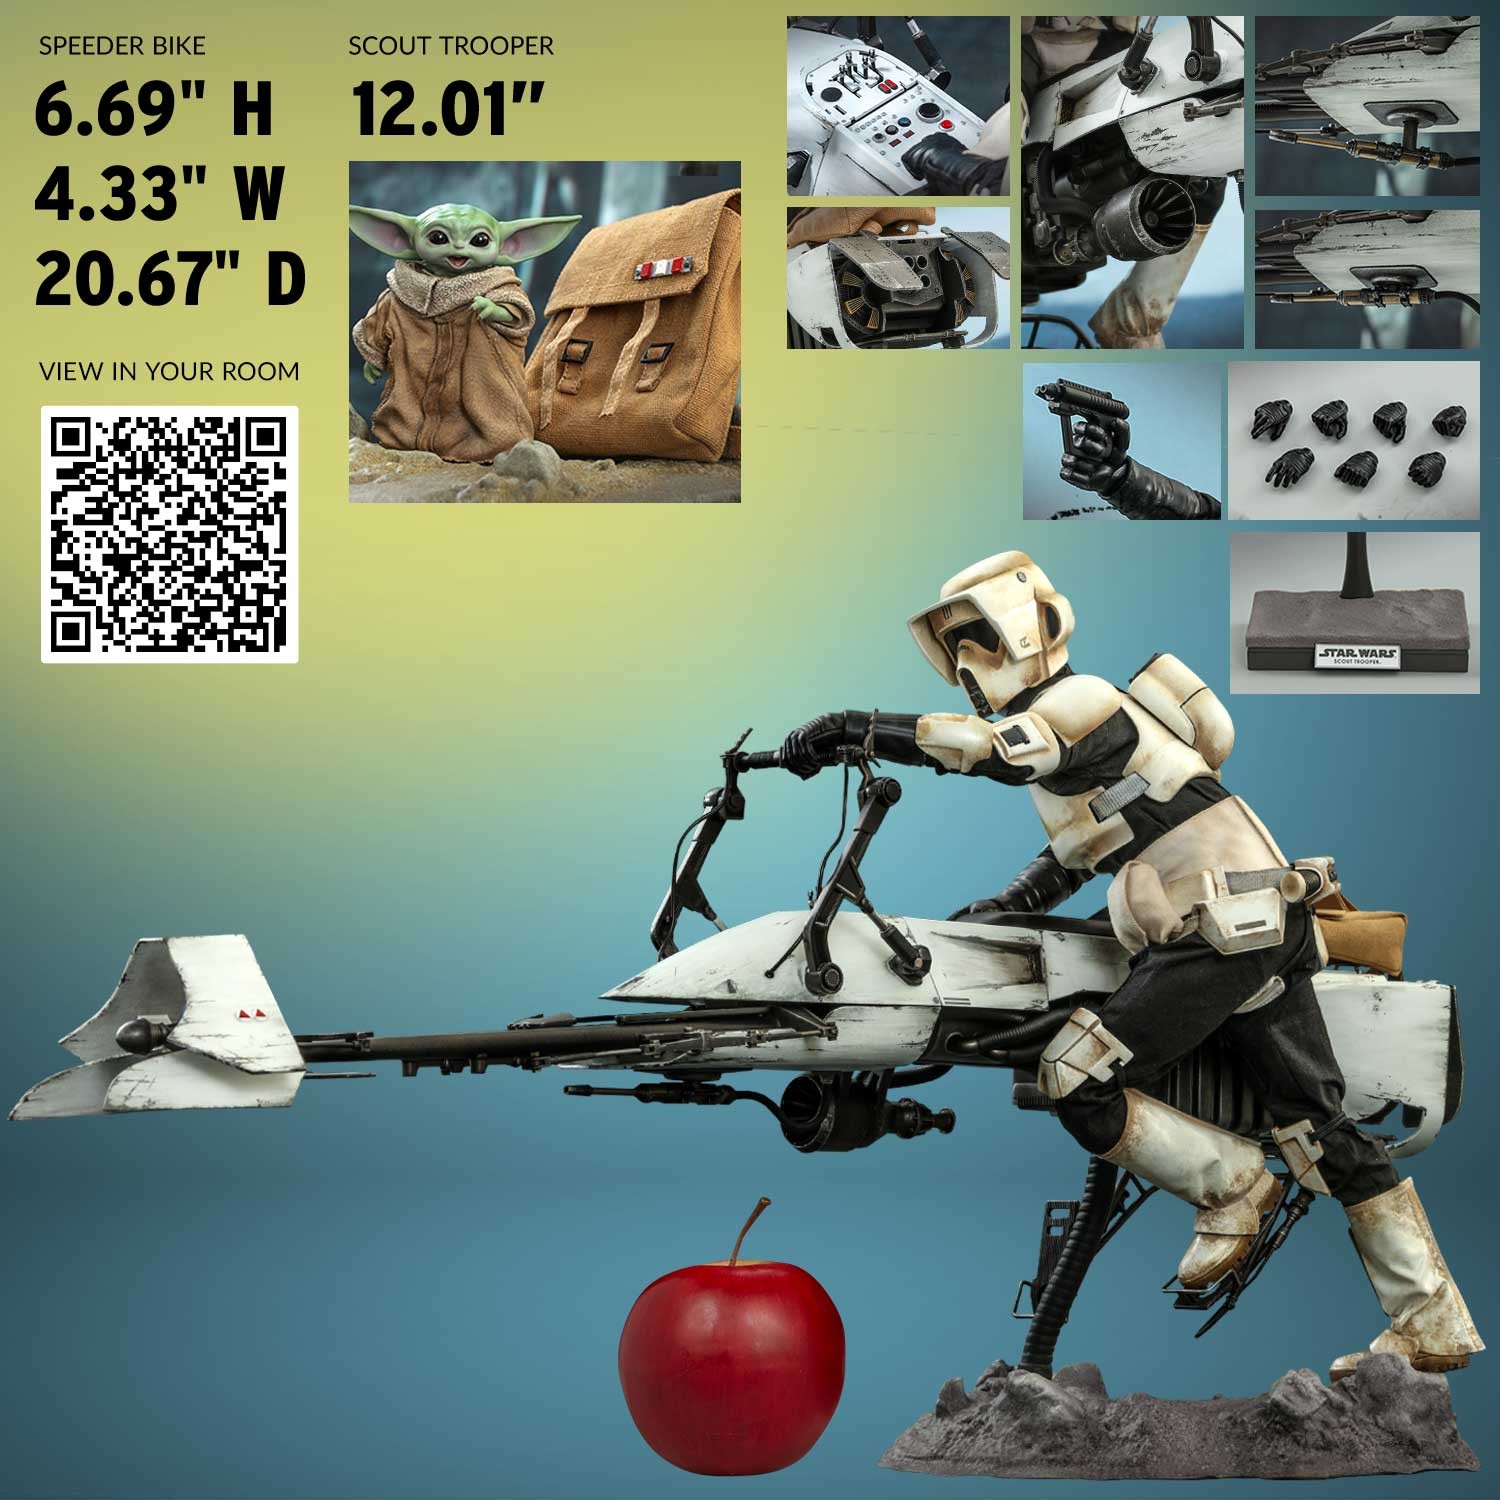 Scout Trooper and Speeder Bike (Prototype Shown) View 2